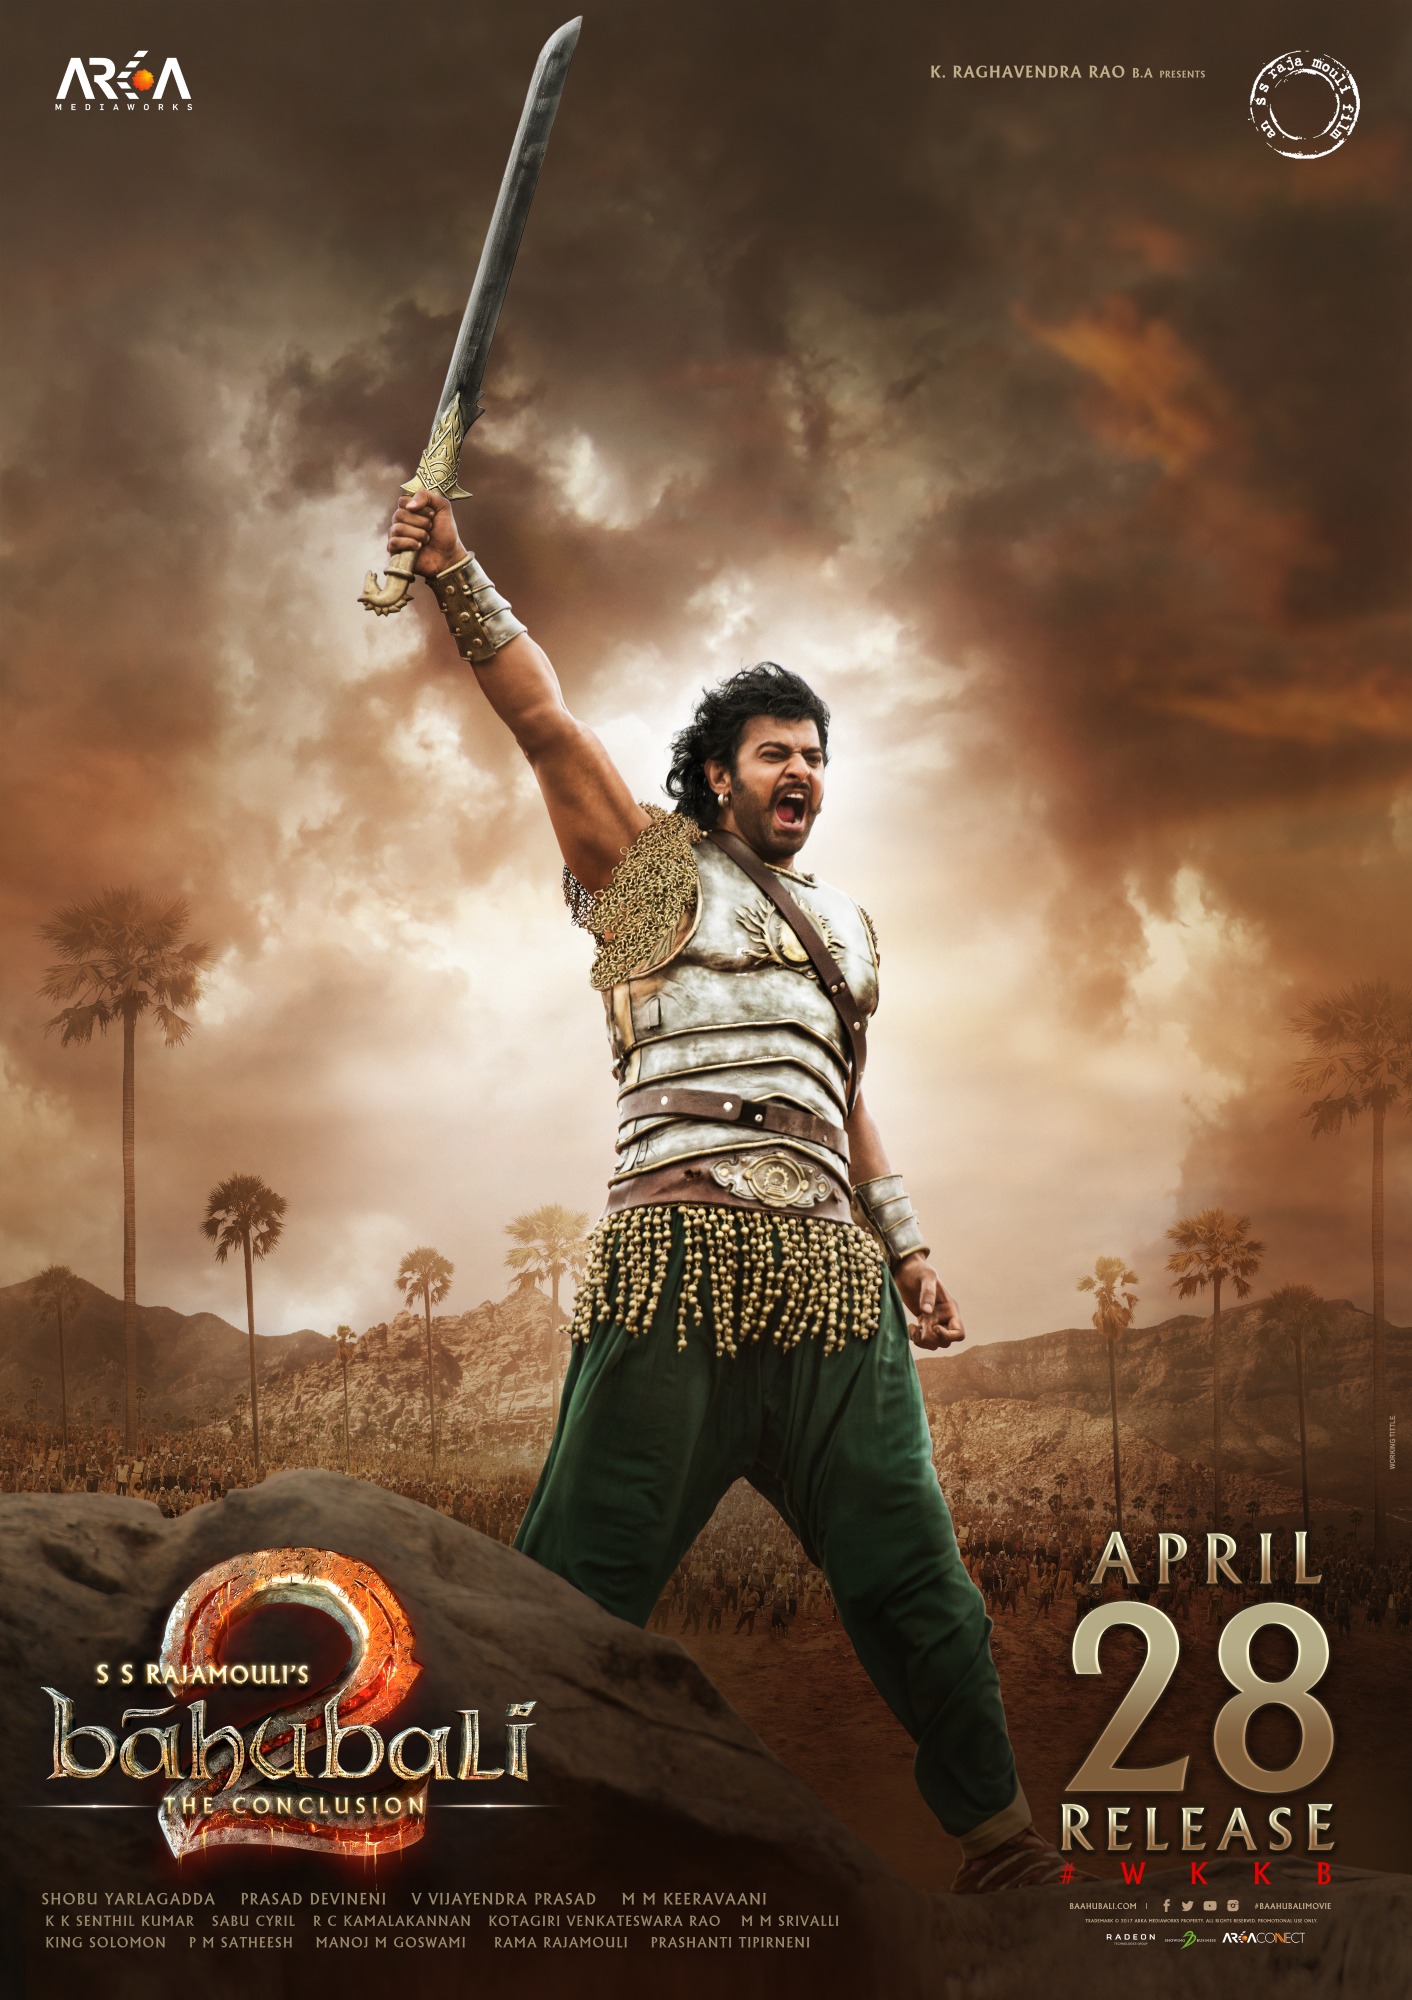 Mega Sized Movie Poster Image for Baahubali 2: The Conclusion (#11 of 12)